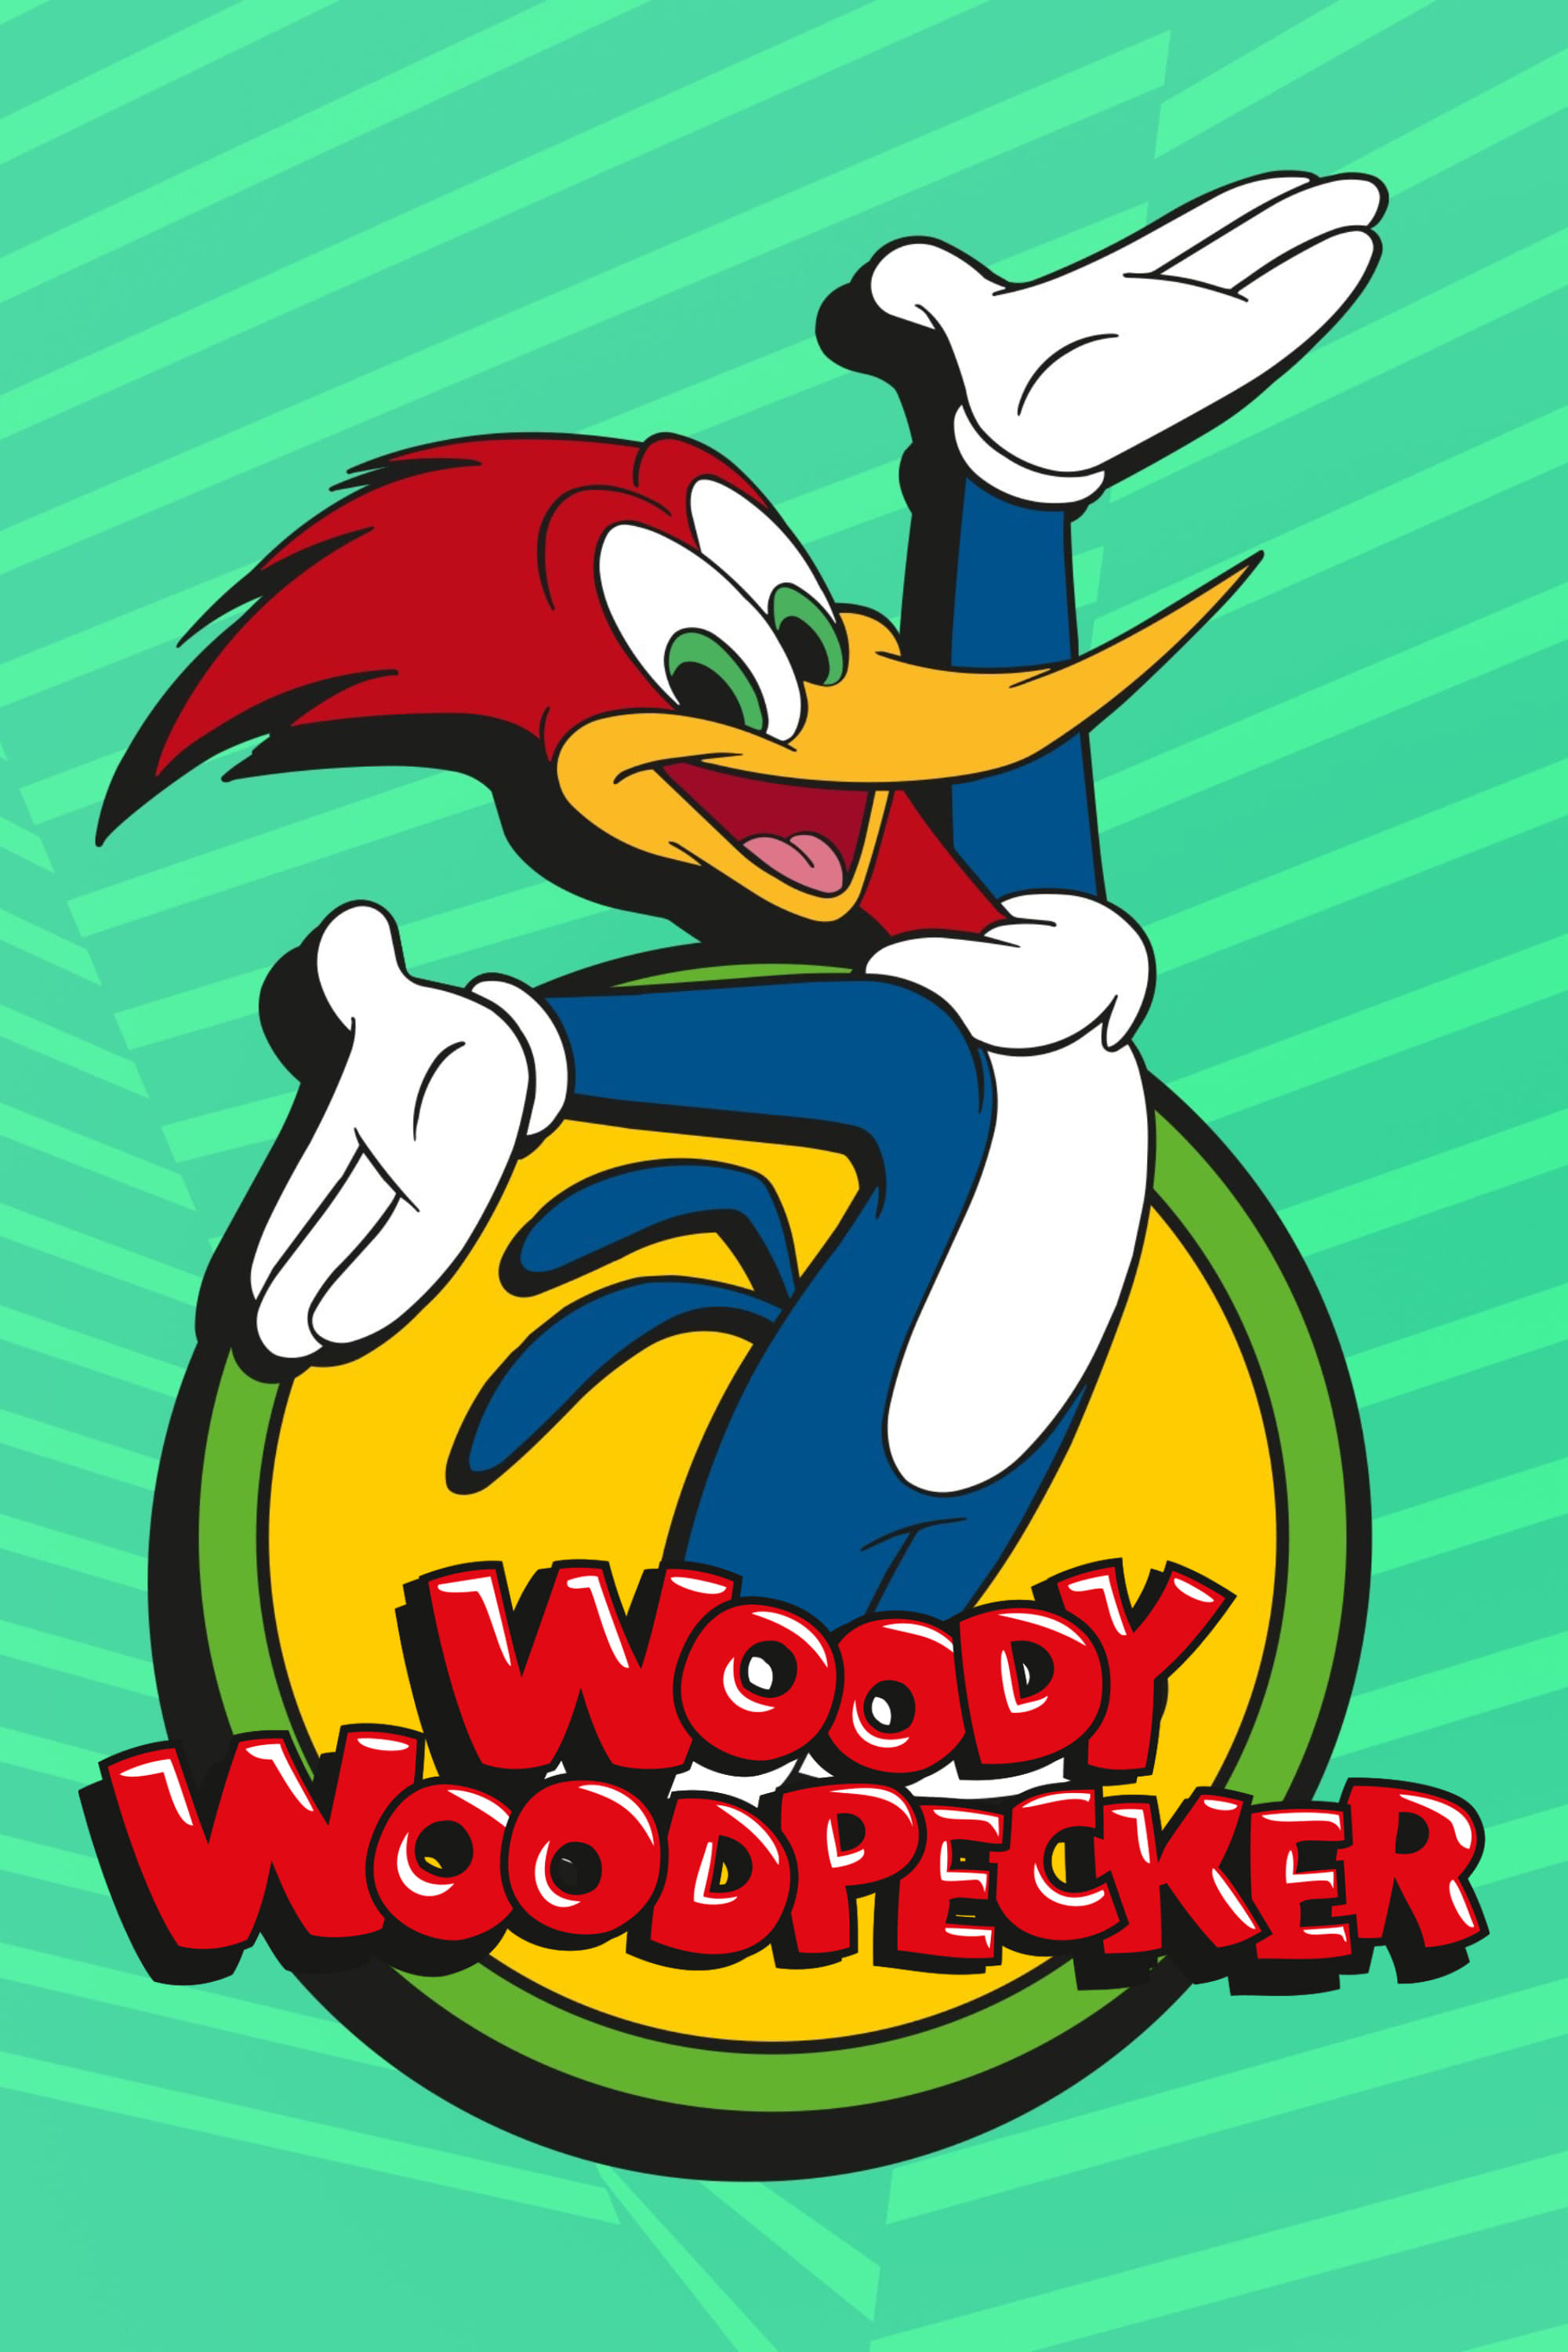 The New Woody Woodpecker Show (1999)